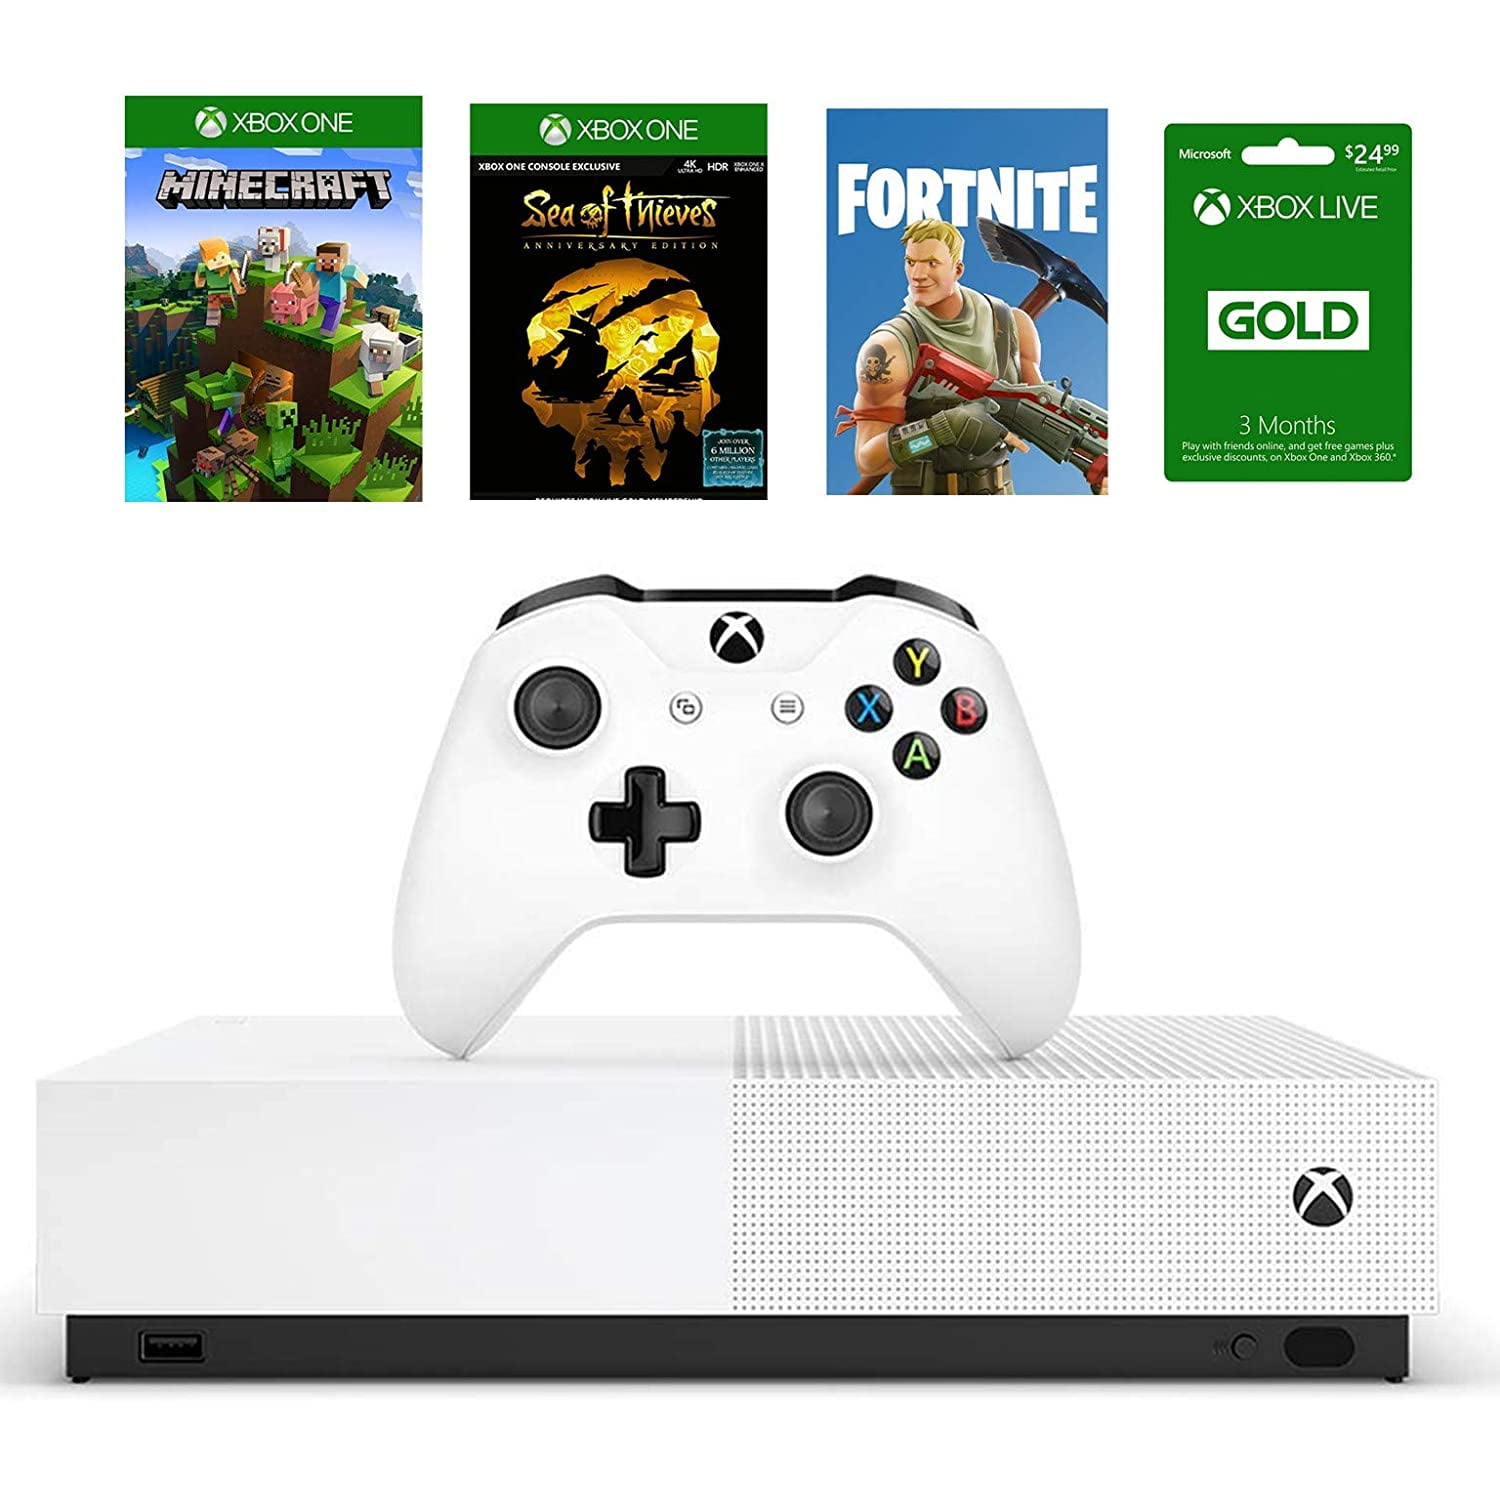 Microsoft Xbox One S 1TB Gaming Console Minecraft Edition with Wireless  Controller Manufacturer Refurbished